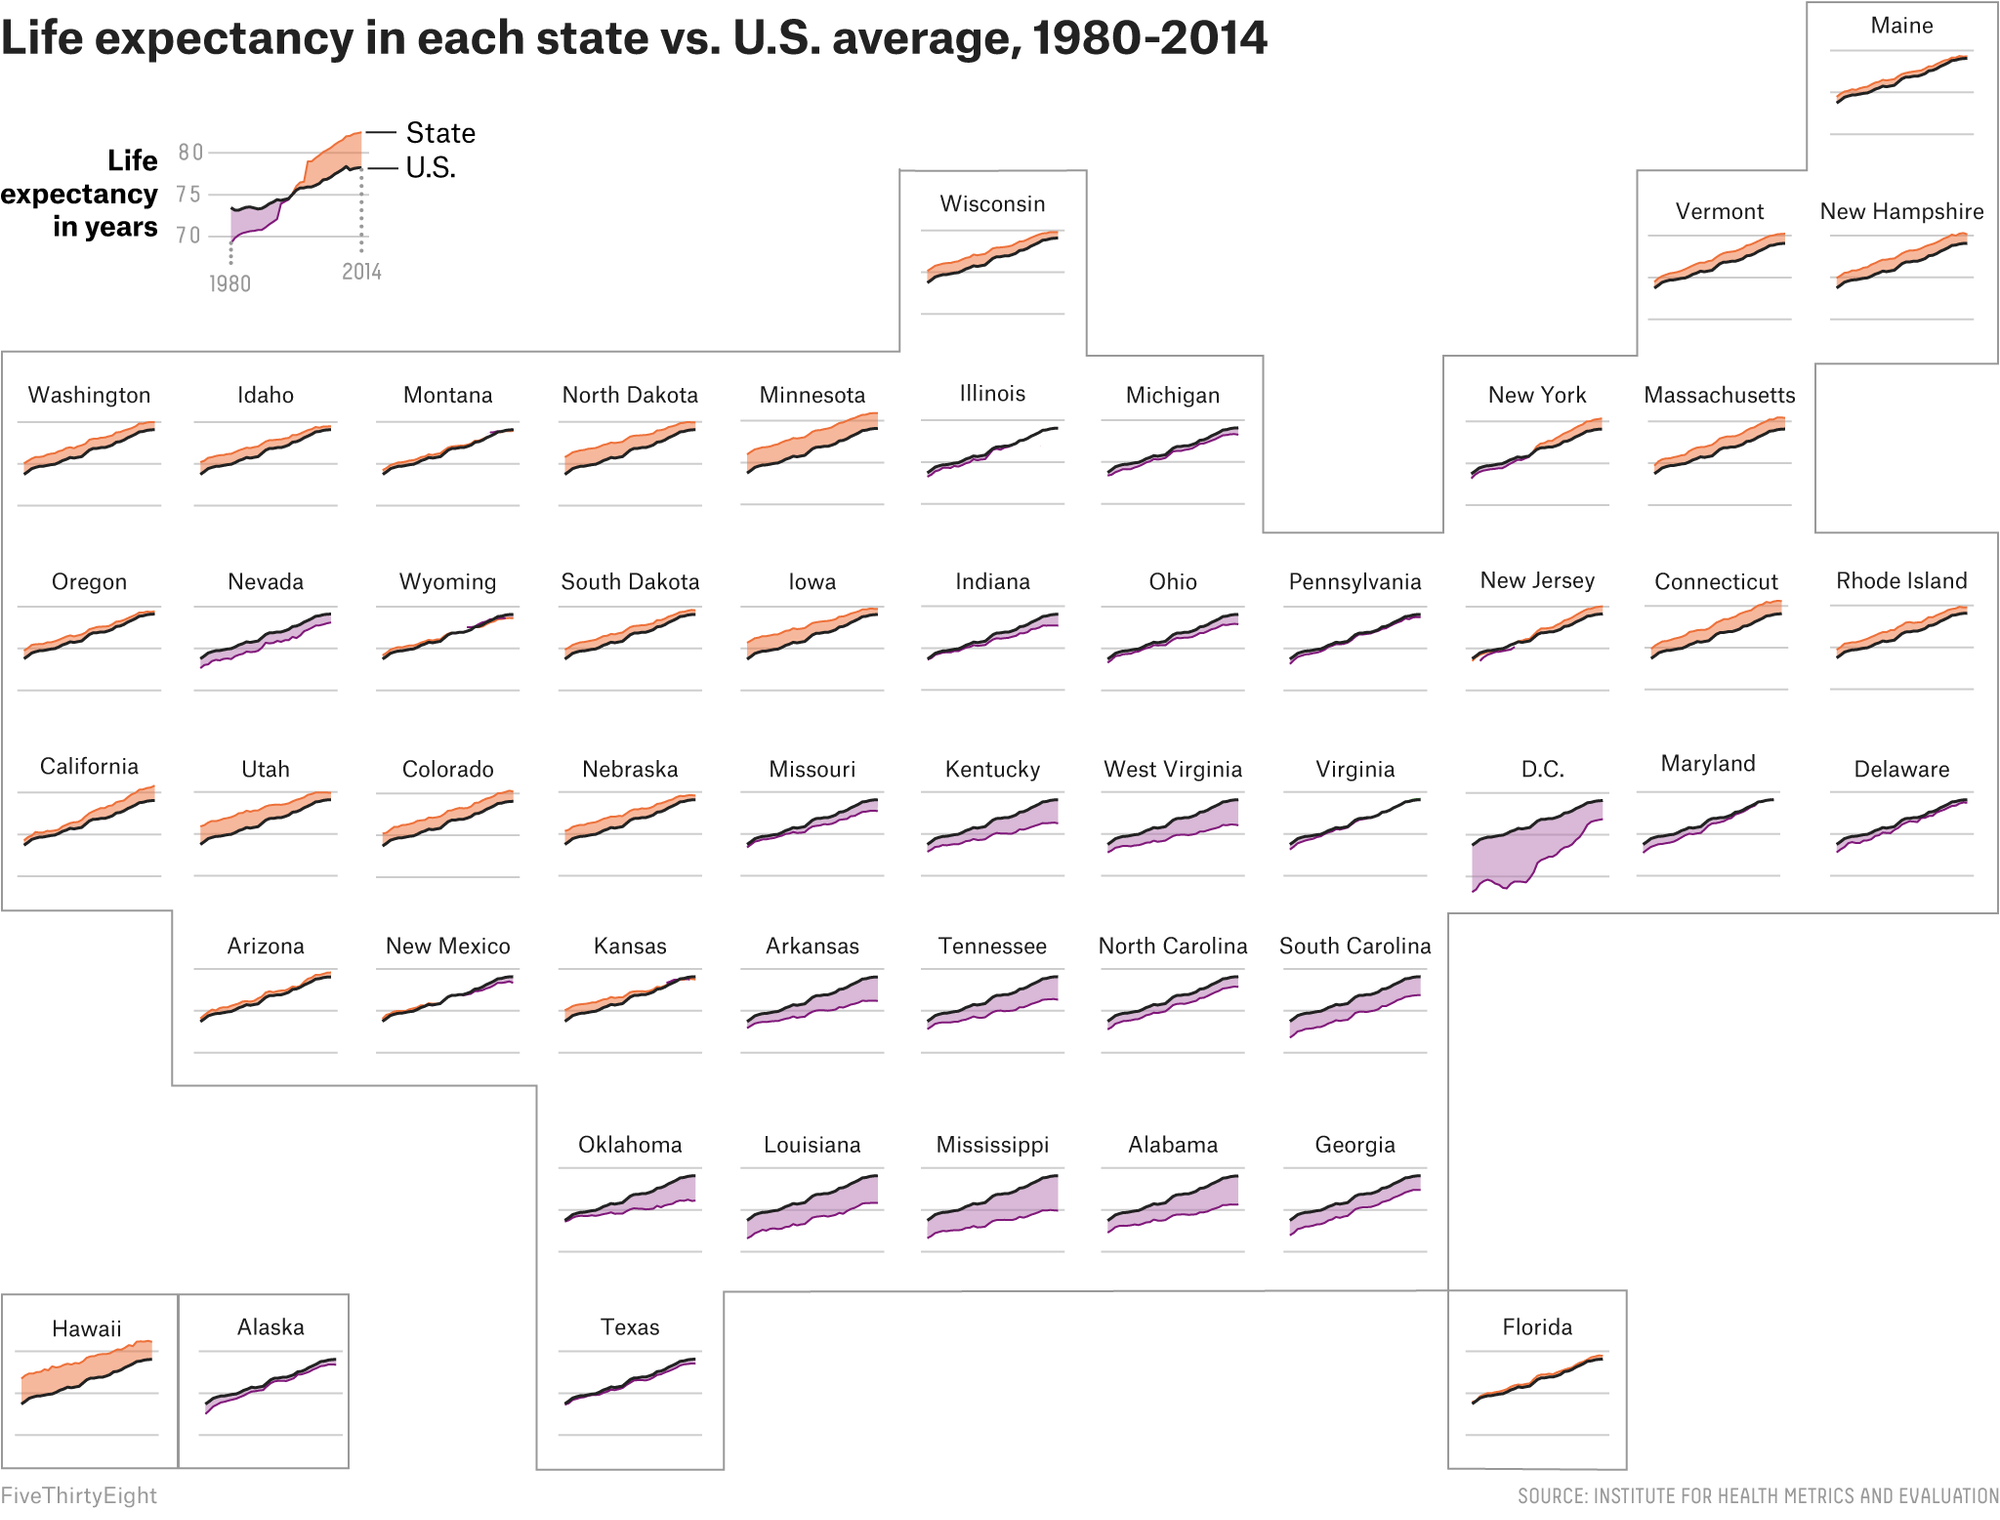 Life expectancy by state, against the US average